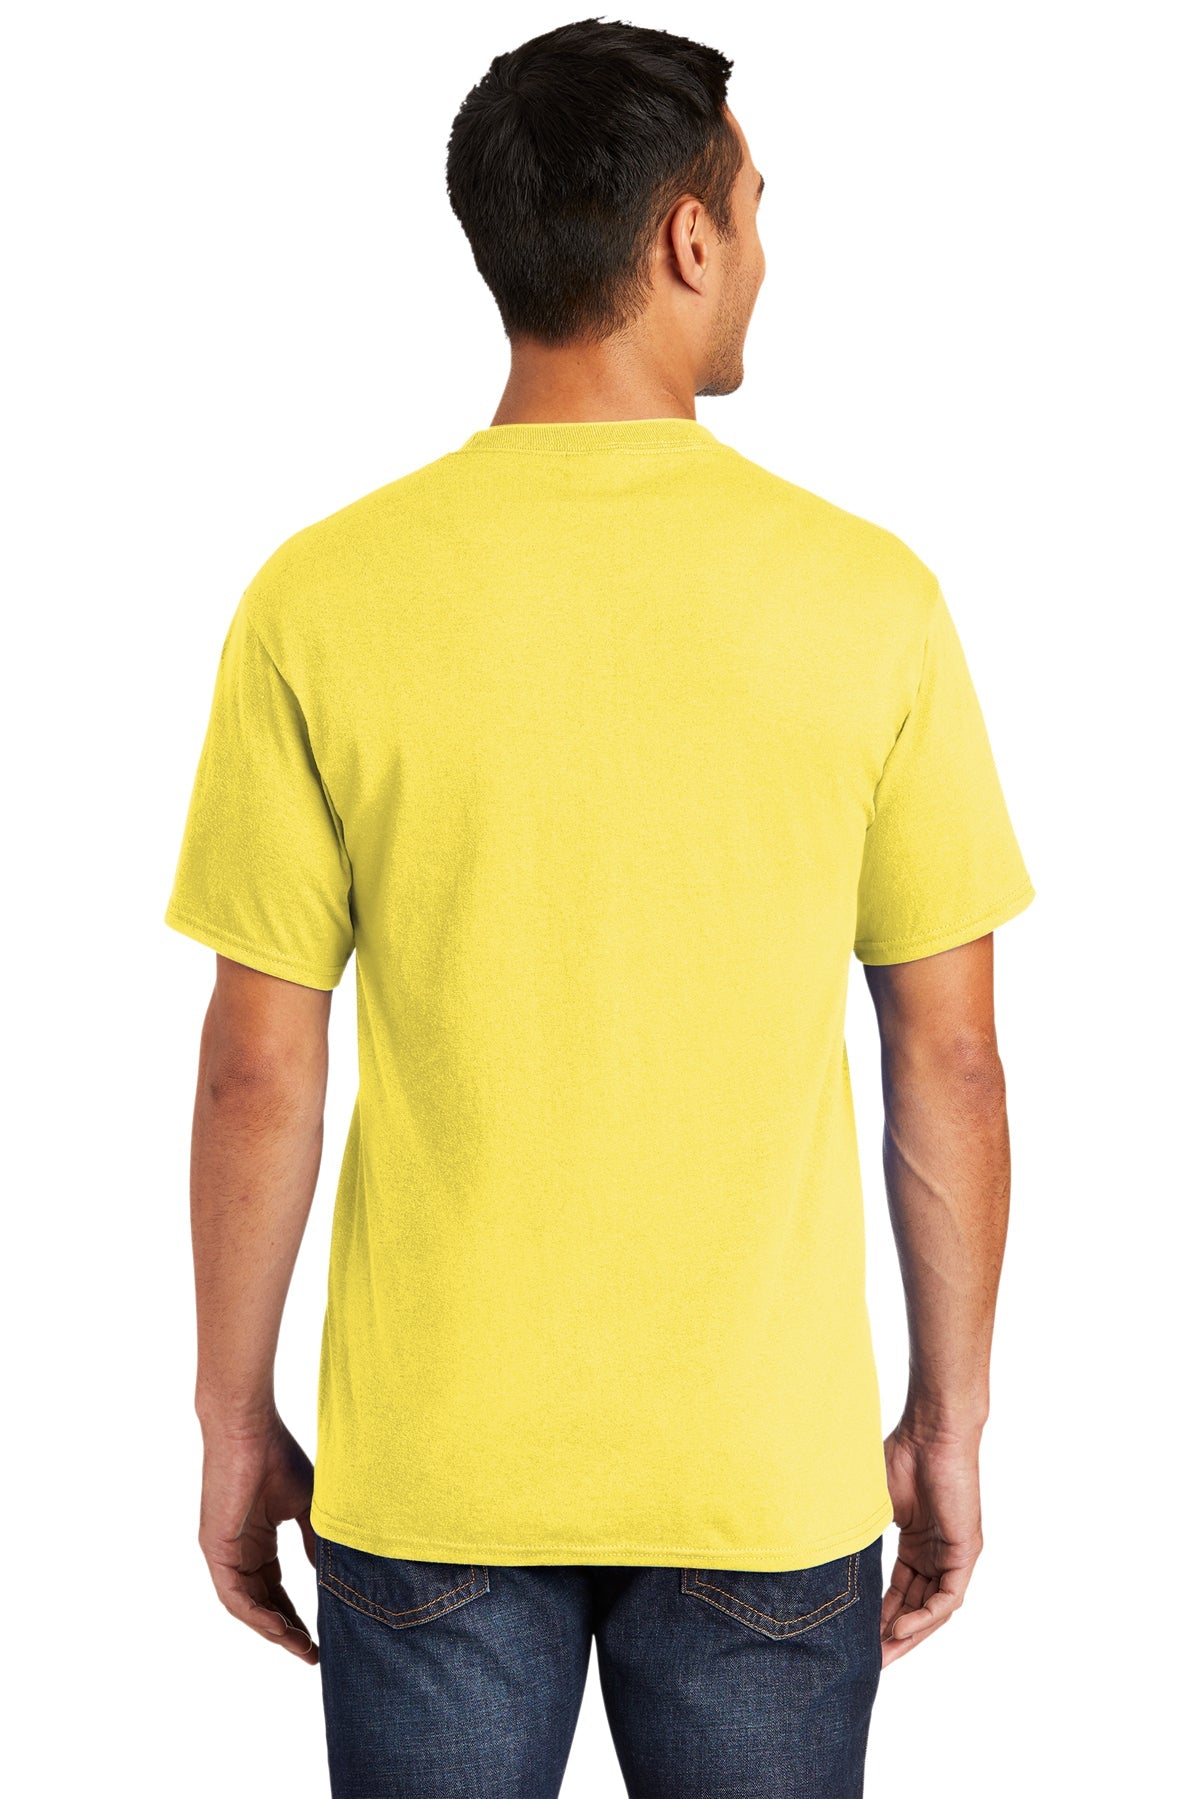 Port & Company Tall Core Blend Customized Tee's, Yellow